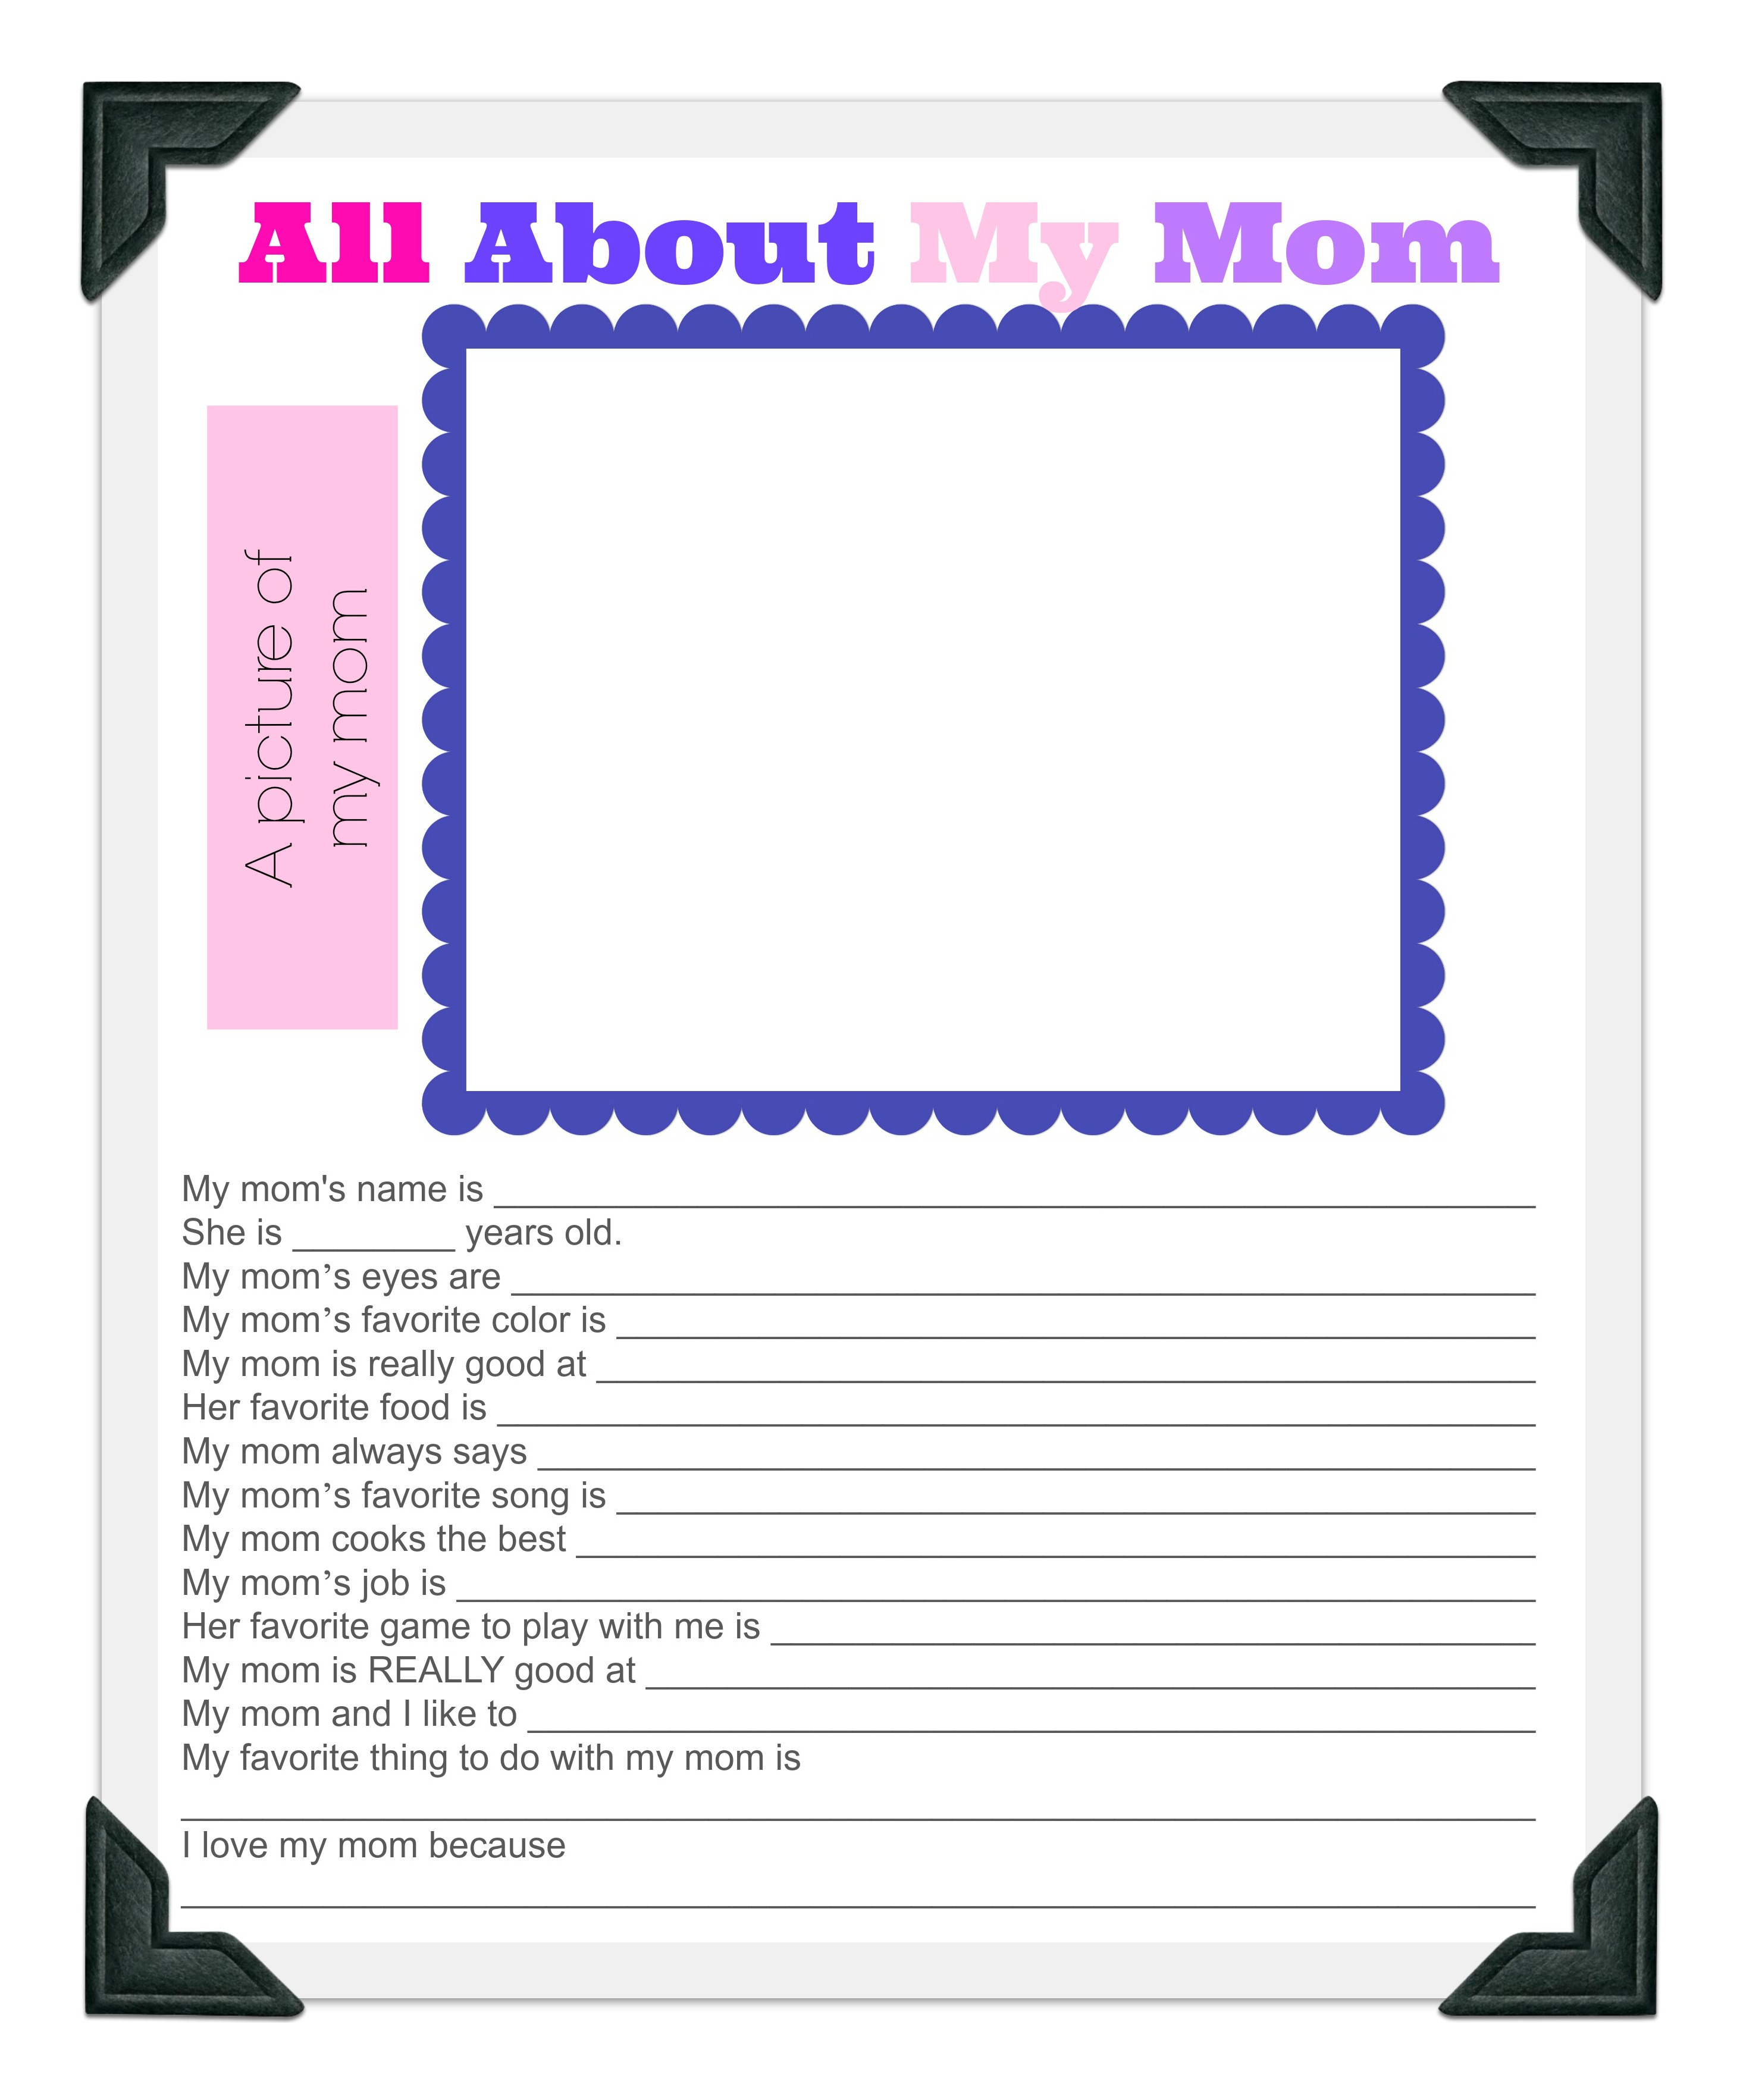 This Printable Mother's Day Questionnaire Will Make Mom Smile